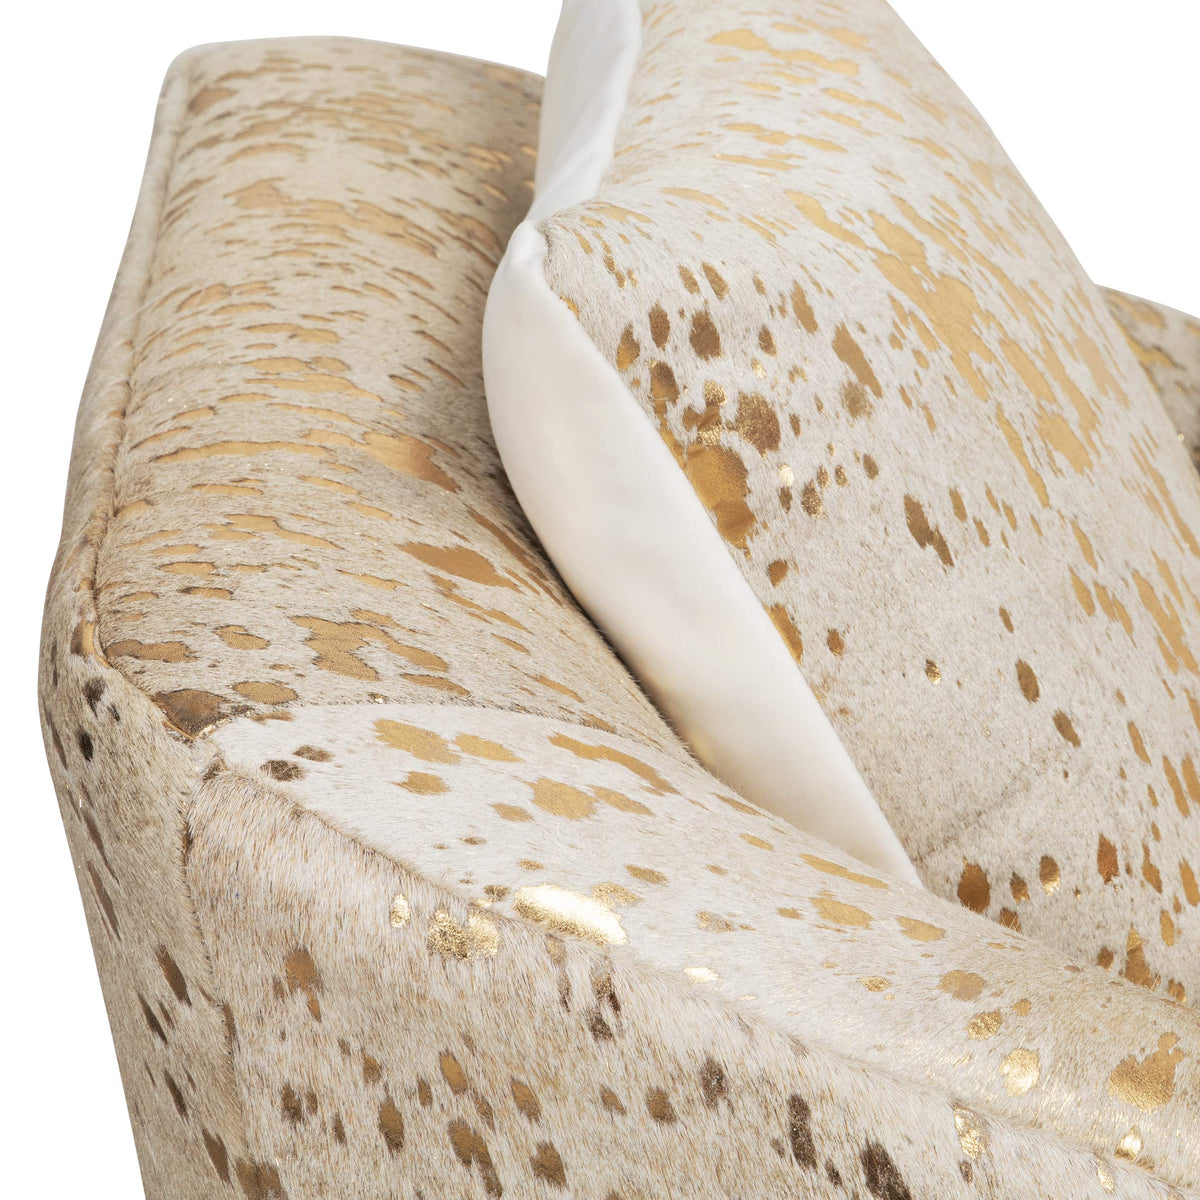 Marseille Occasional Chair in Cowhide